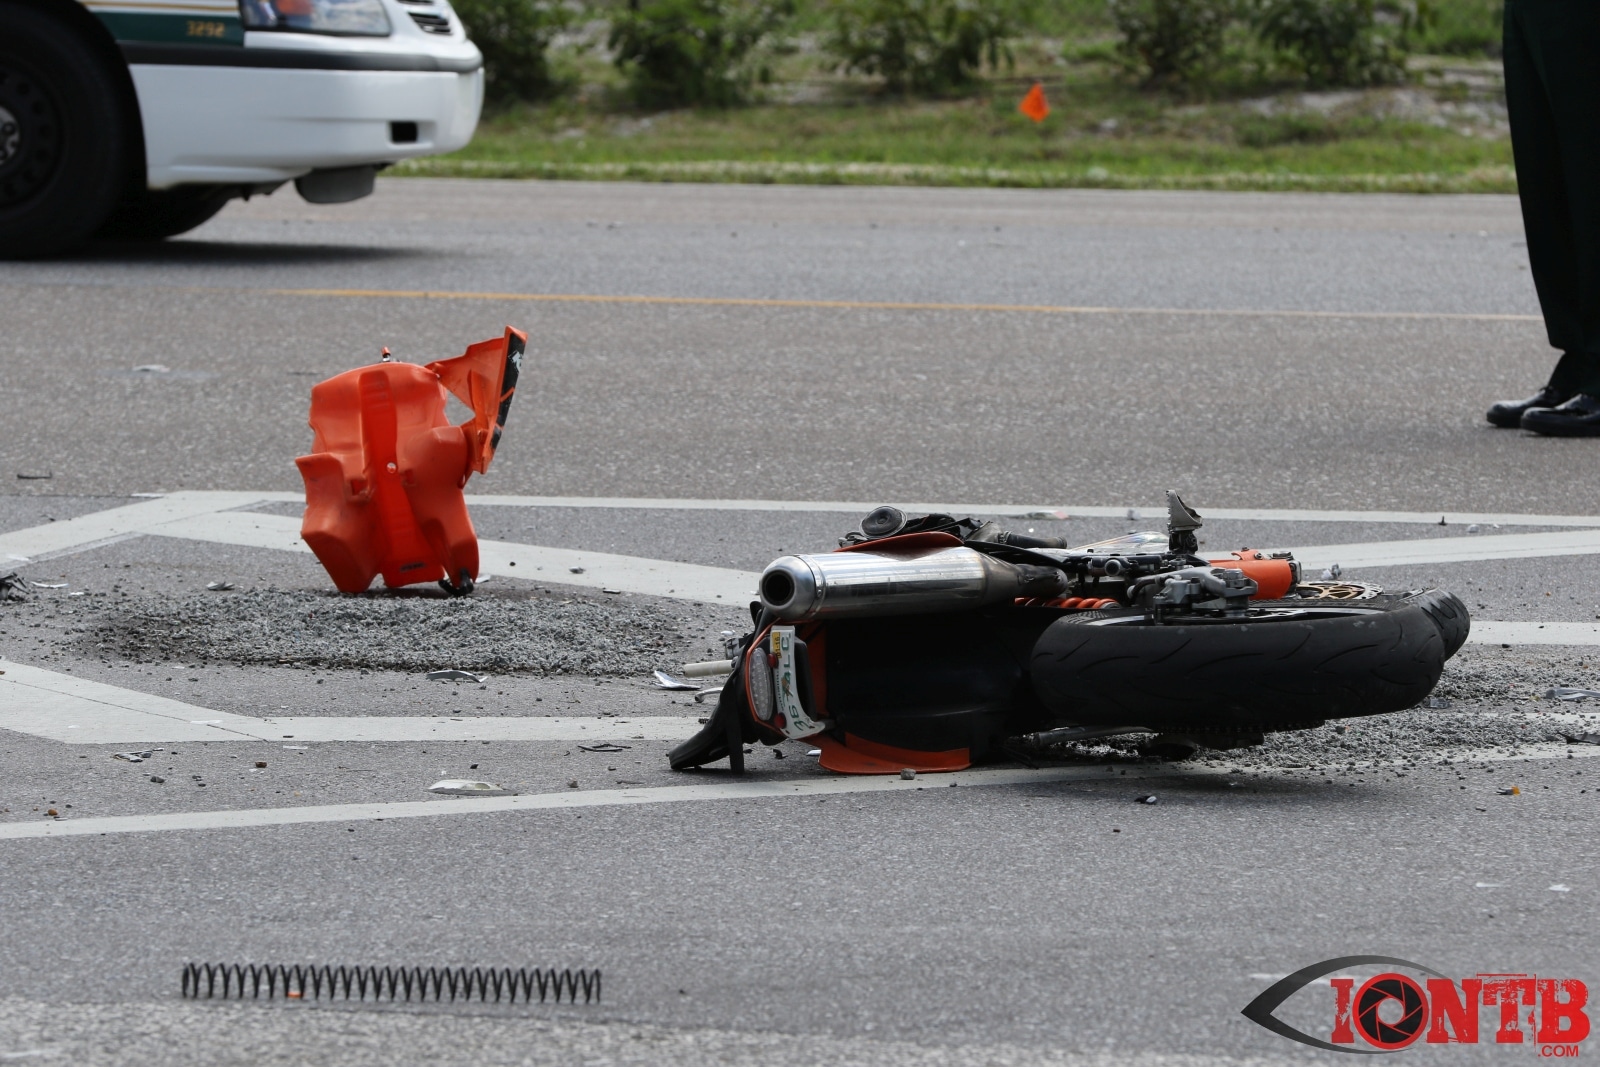 Crash Claims The Life Of Another Motorcyclist Today In Largo